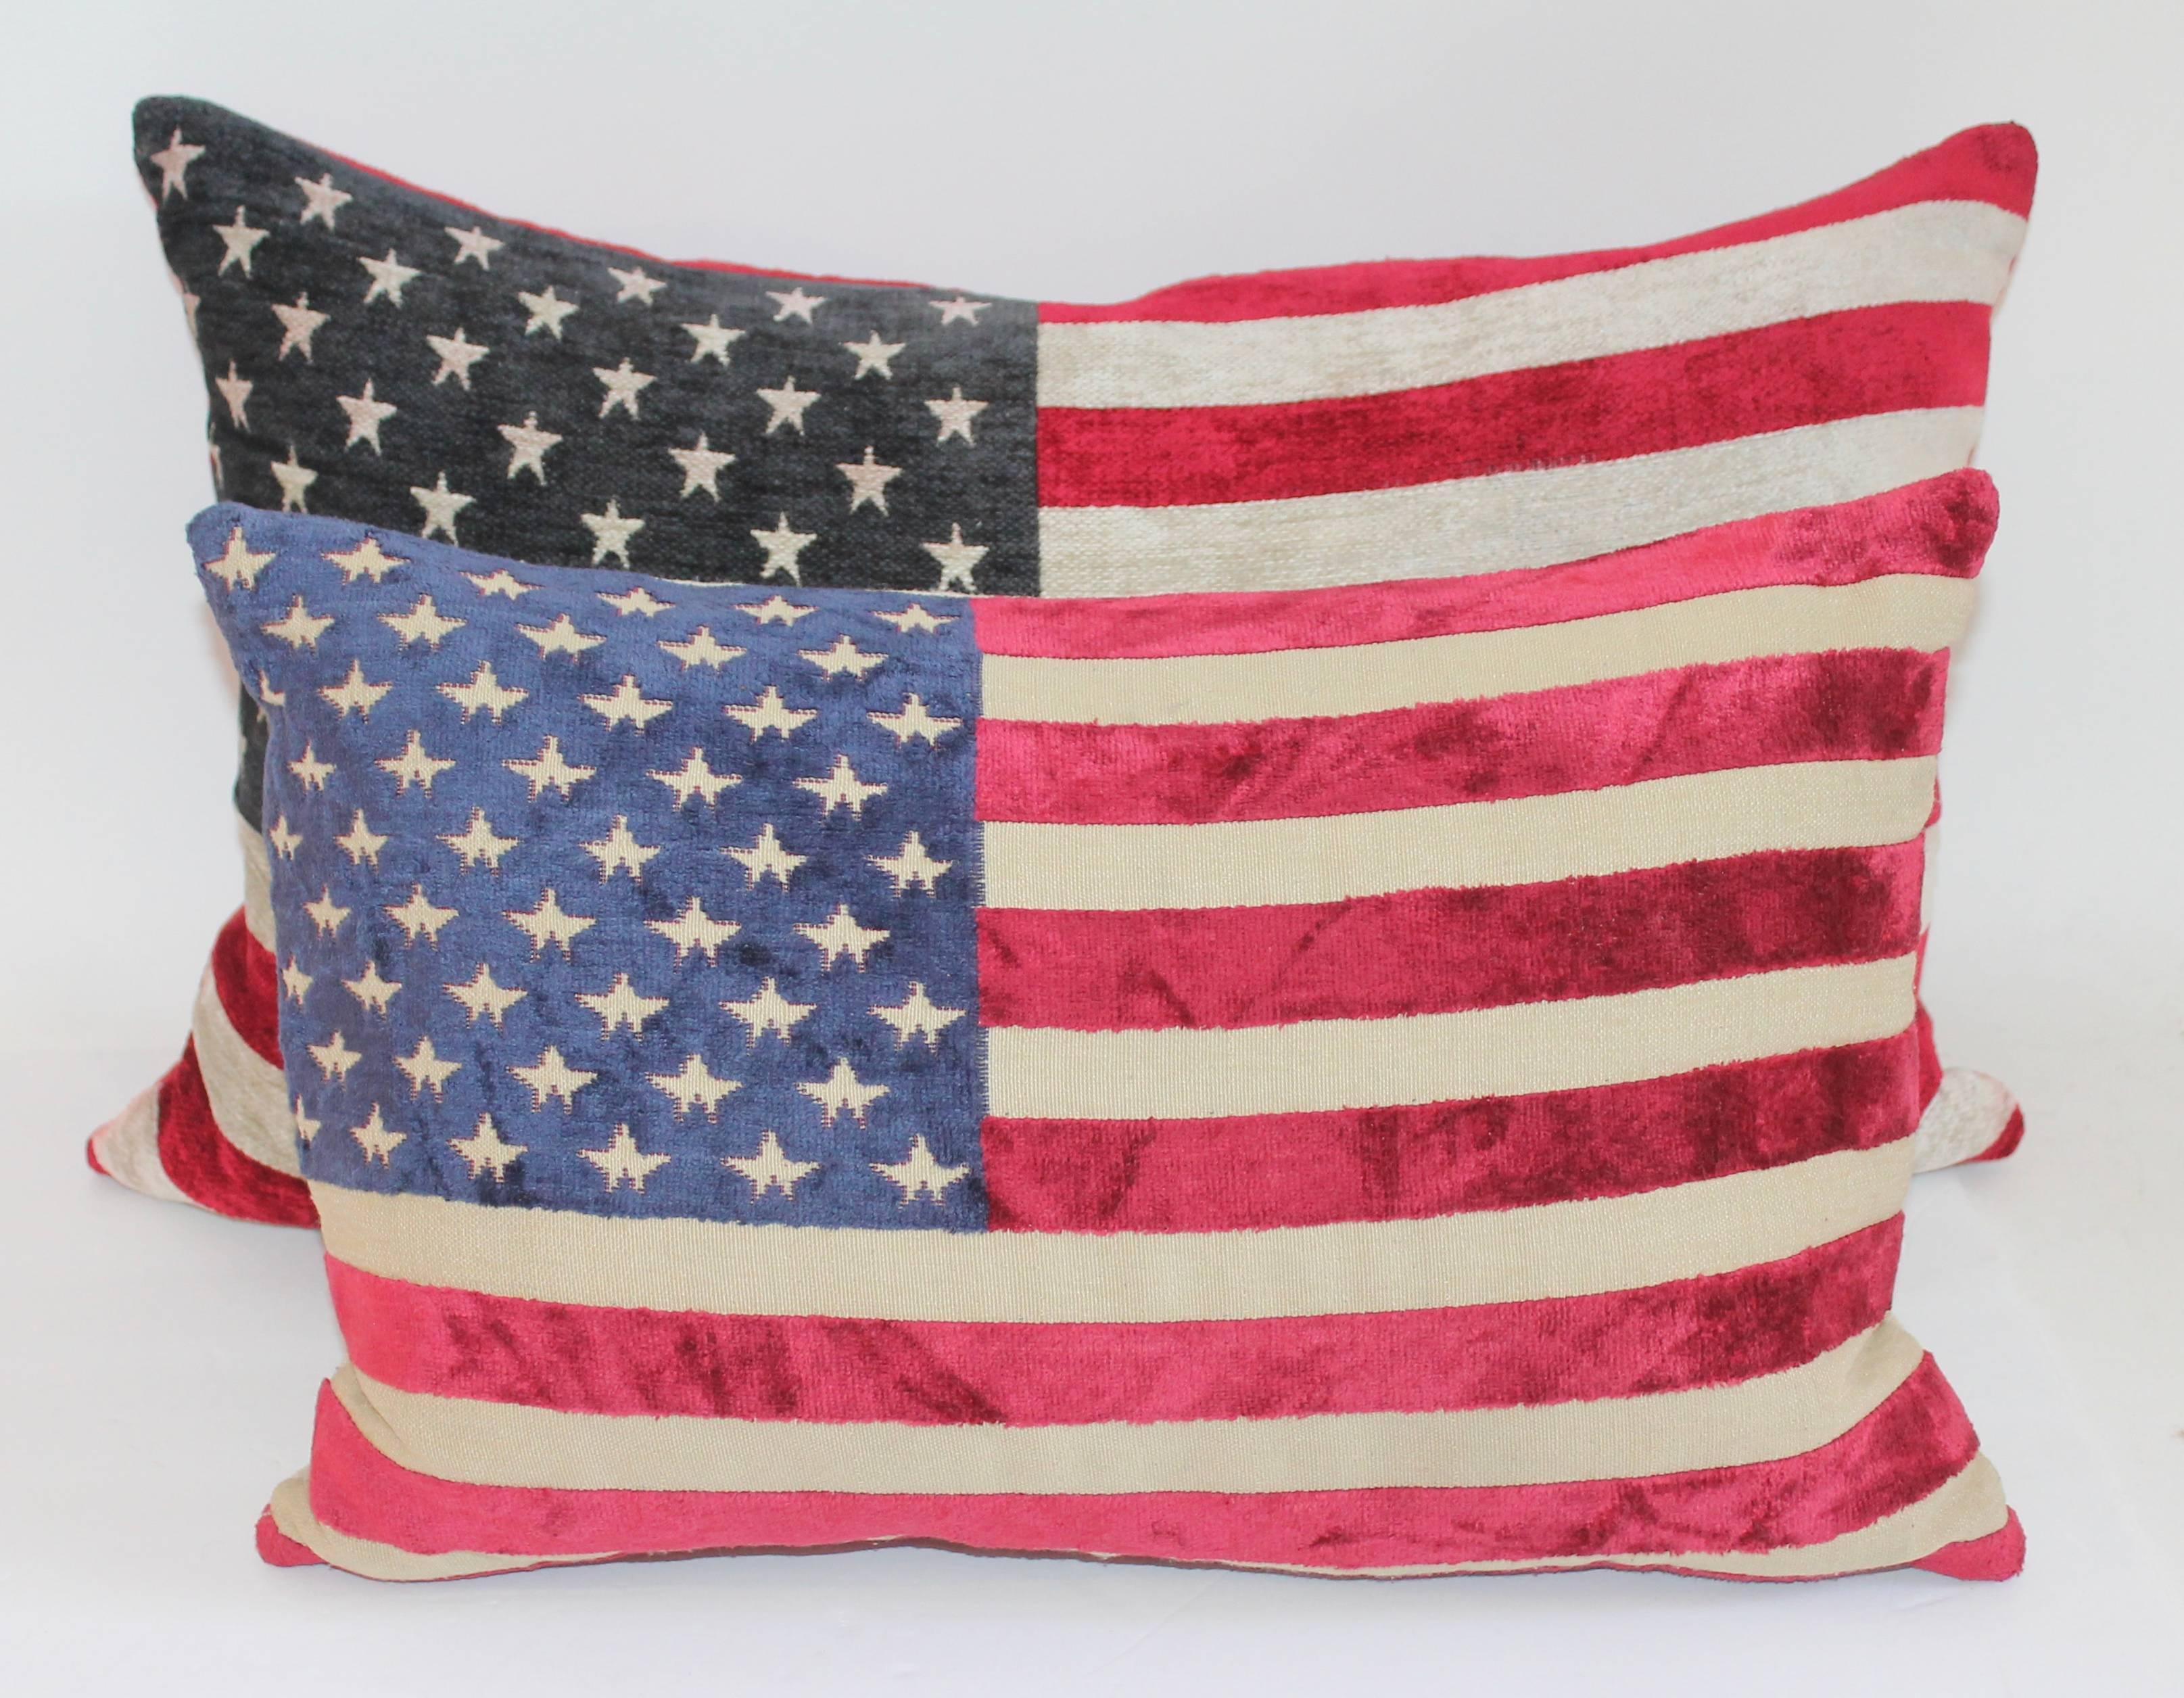 These soft fabric 50 star vintage flags made the coolest pillows. Sold as a pair, yet two different colors. The backings are in red and tan cotton linen. These are like Mid-Century flags. Great decorative velvet like pillows.